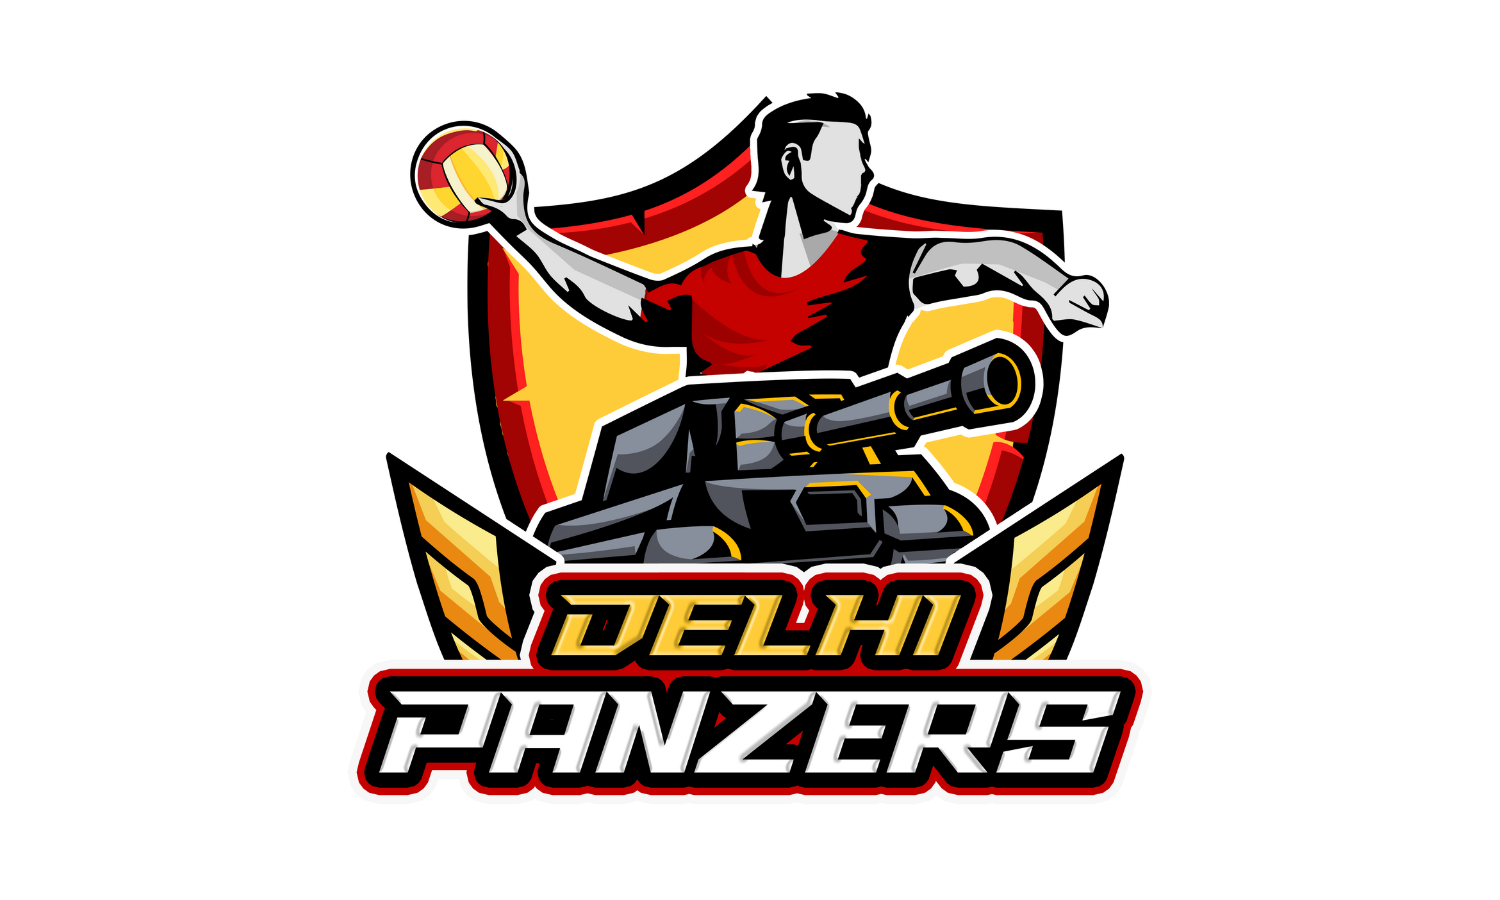 Download Royal Challengers Bangalore - All Ipl Team Logos PNG Image with No  Background - PNGkey.com